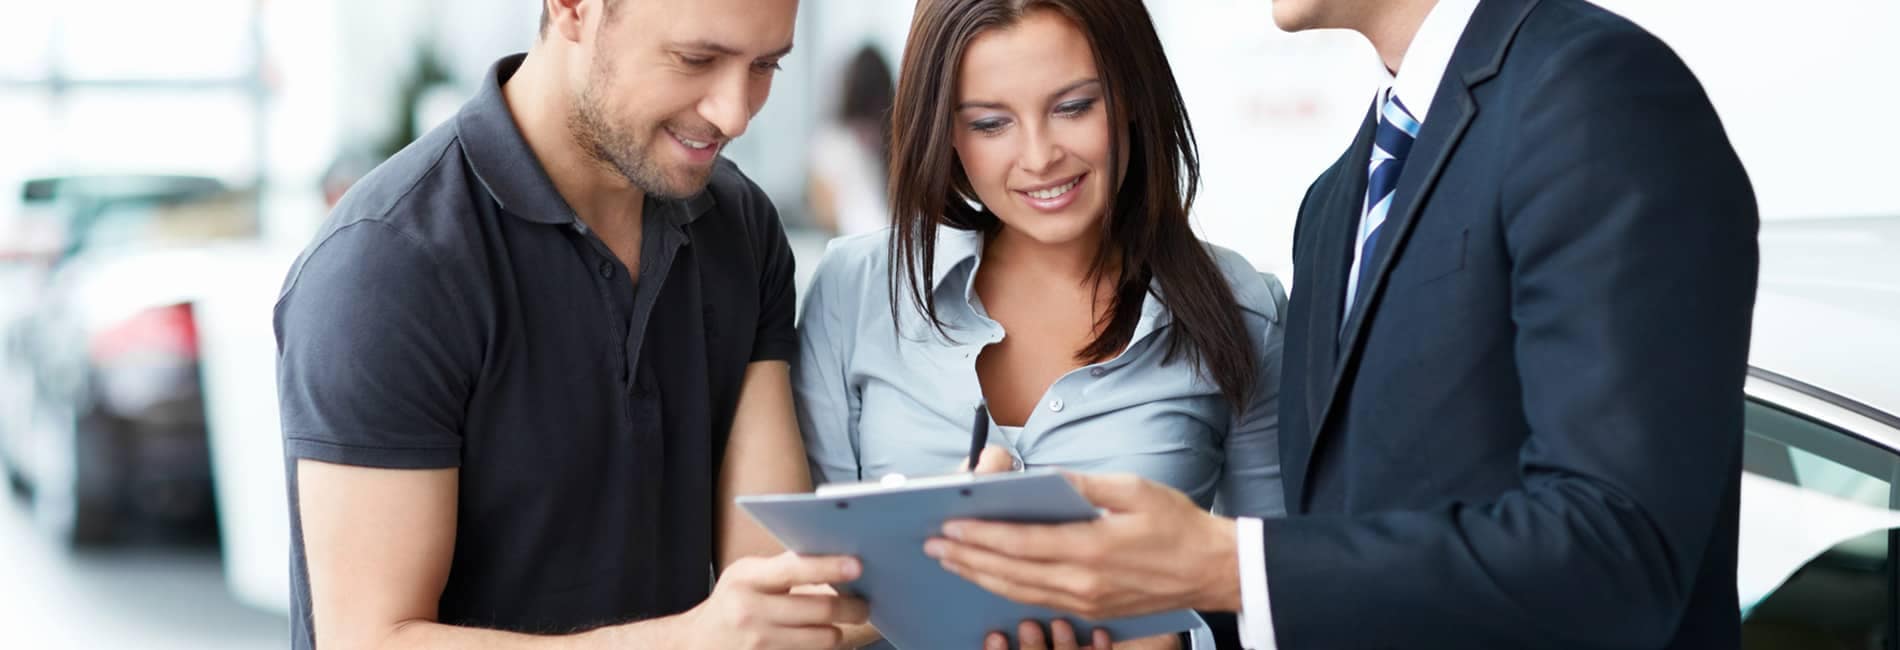 Man and Woman Looking at Documents with Dealer